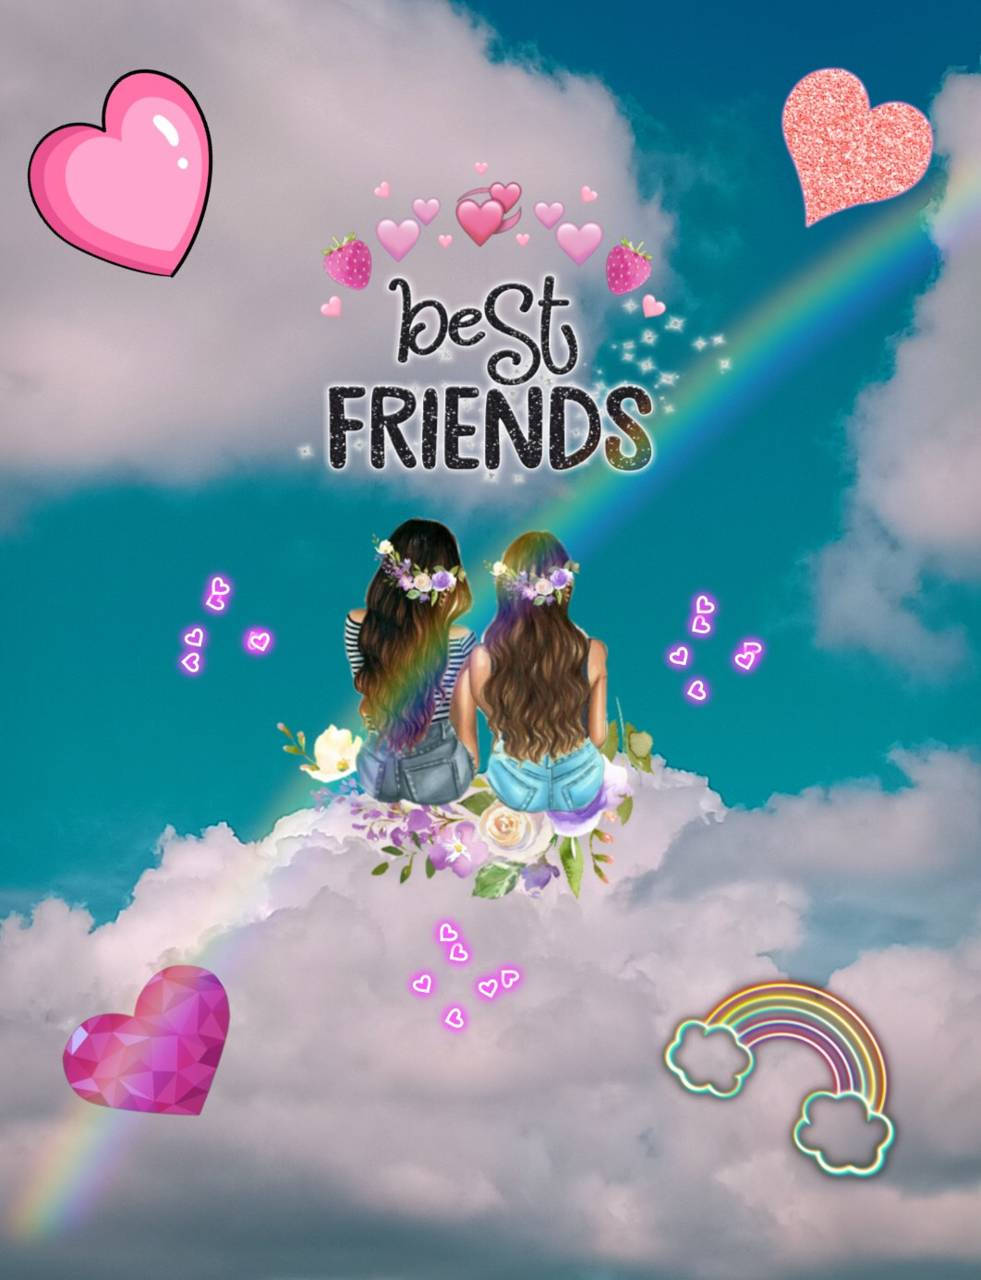 Bff 981X1280 Wallpaper and Background Image